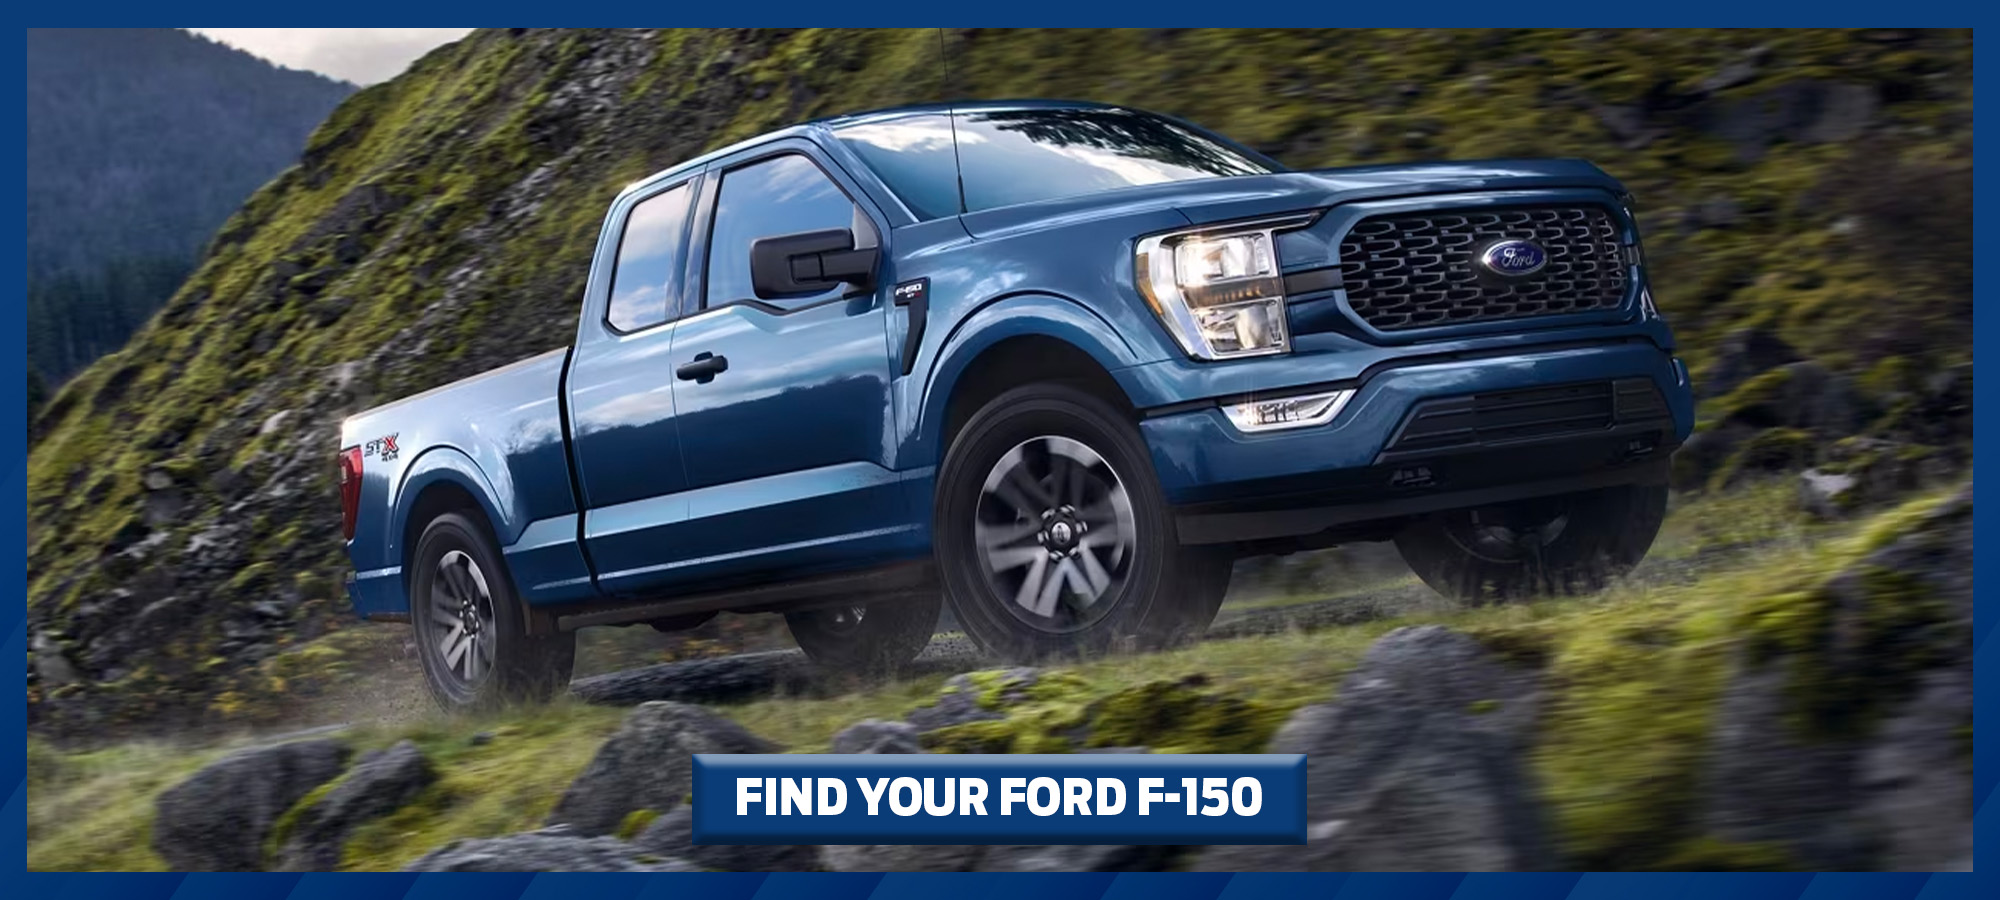 What Is the Best Ford F-150 Engine?